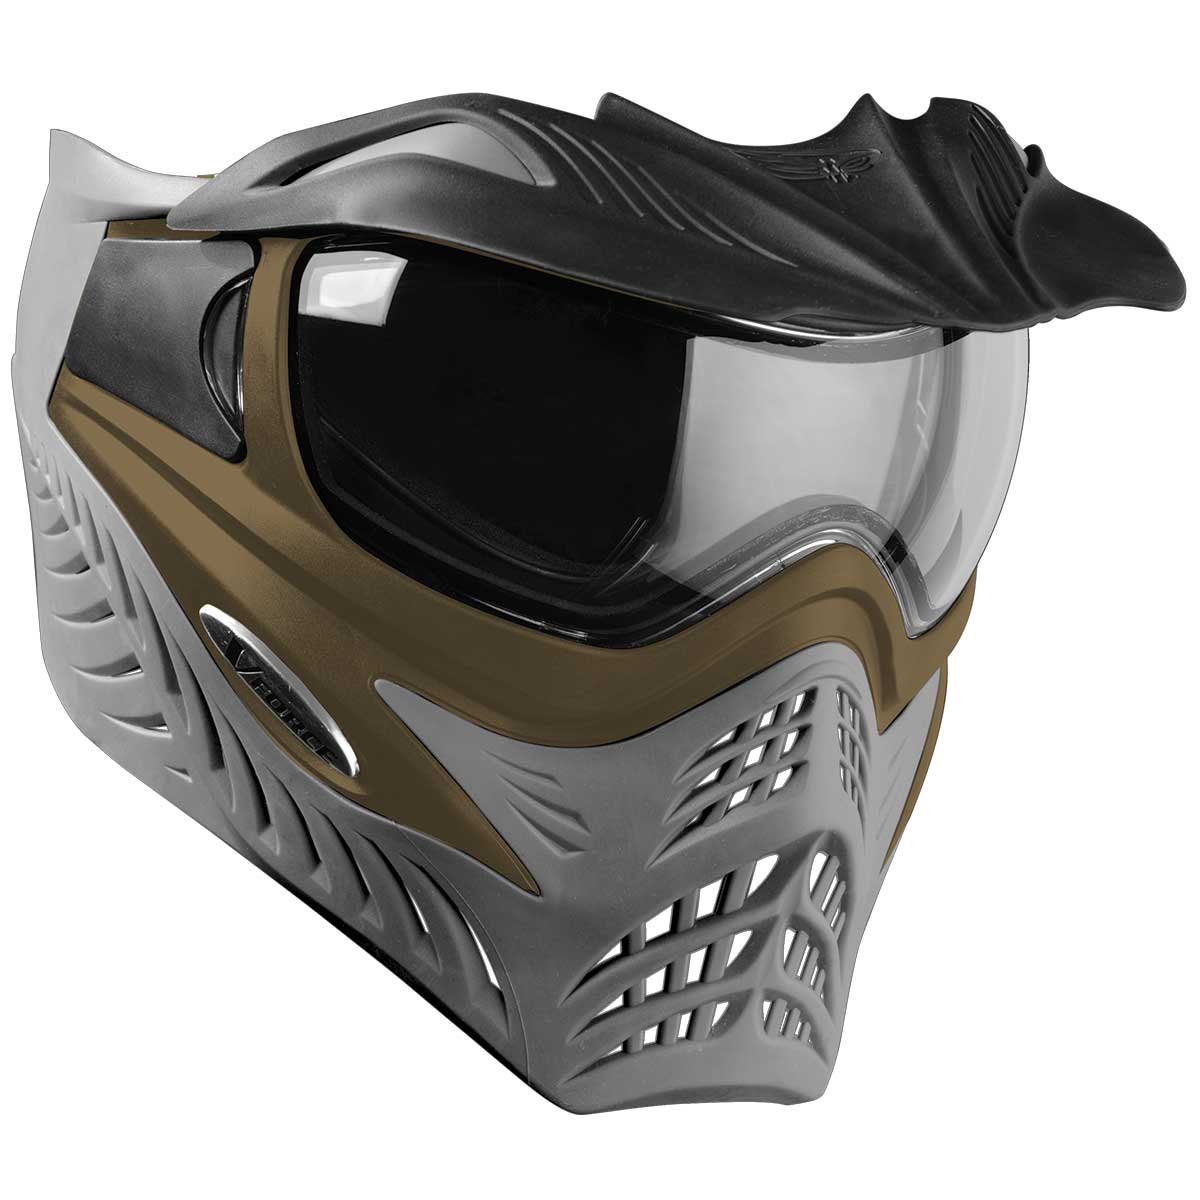 V-Force Grill SC Paintball Mask - Tan on Grey - Eminent Paintball And Airsoft